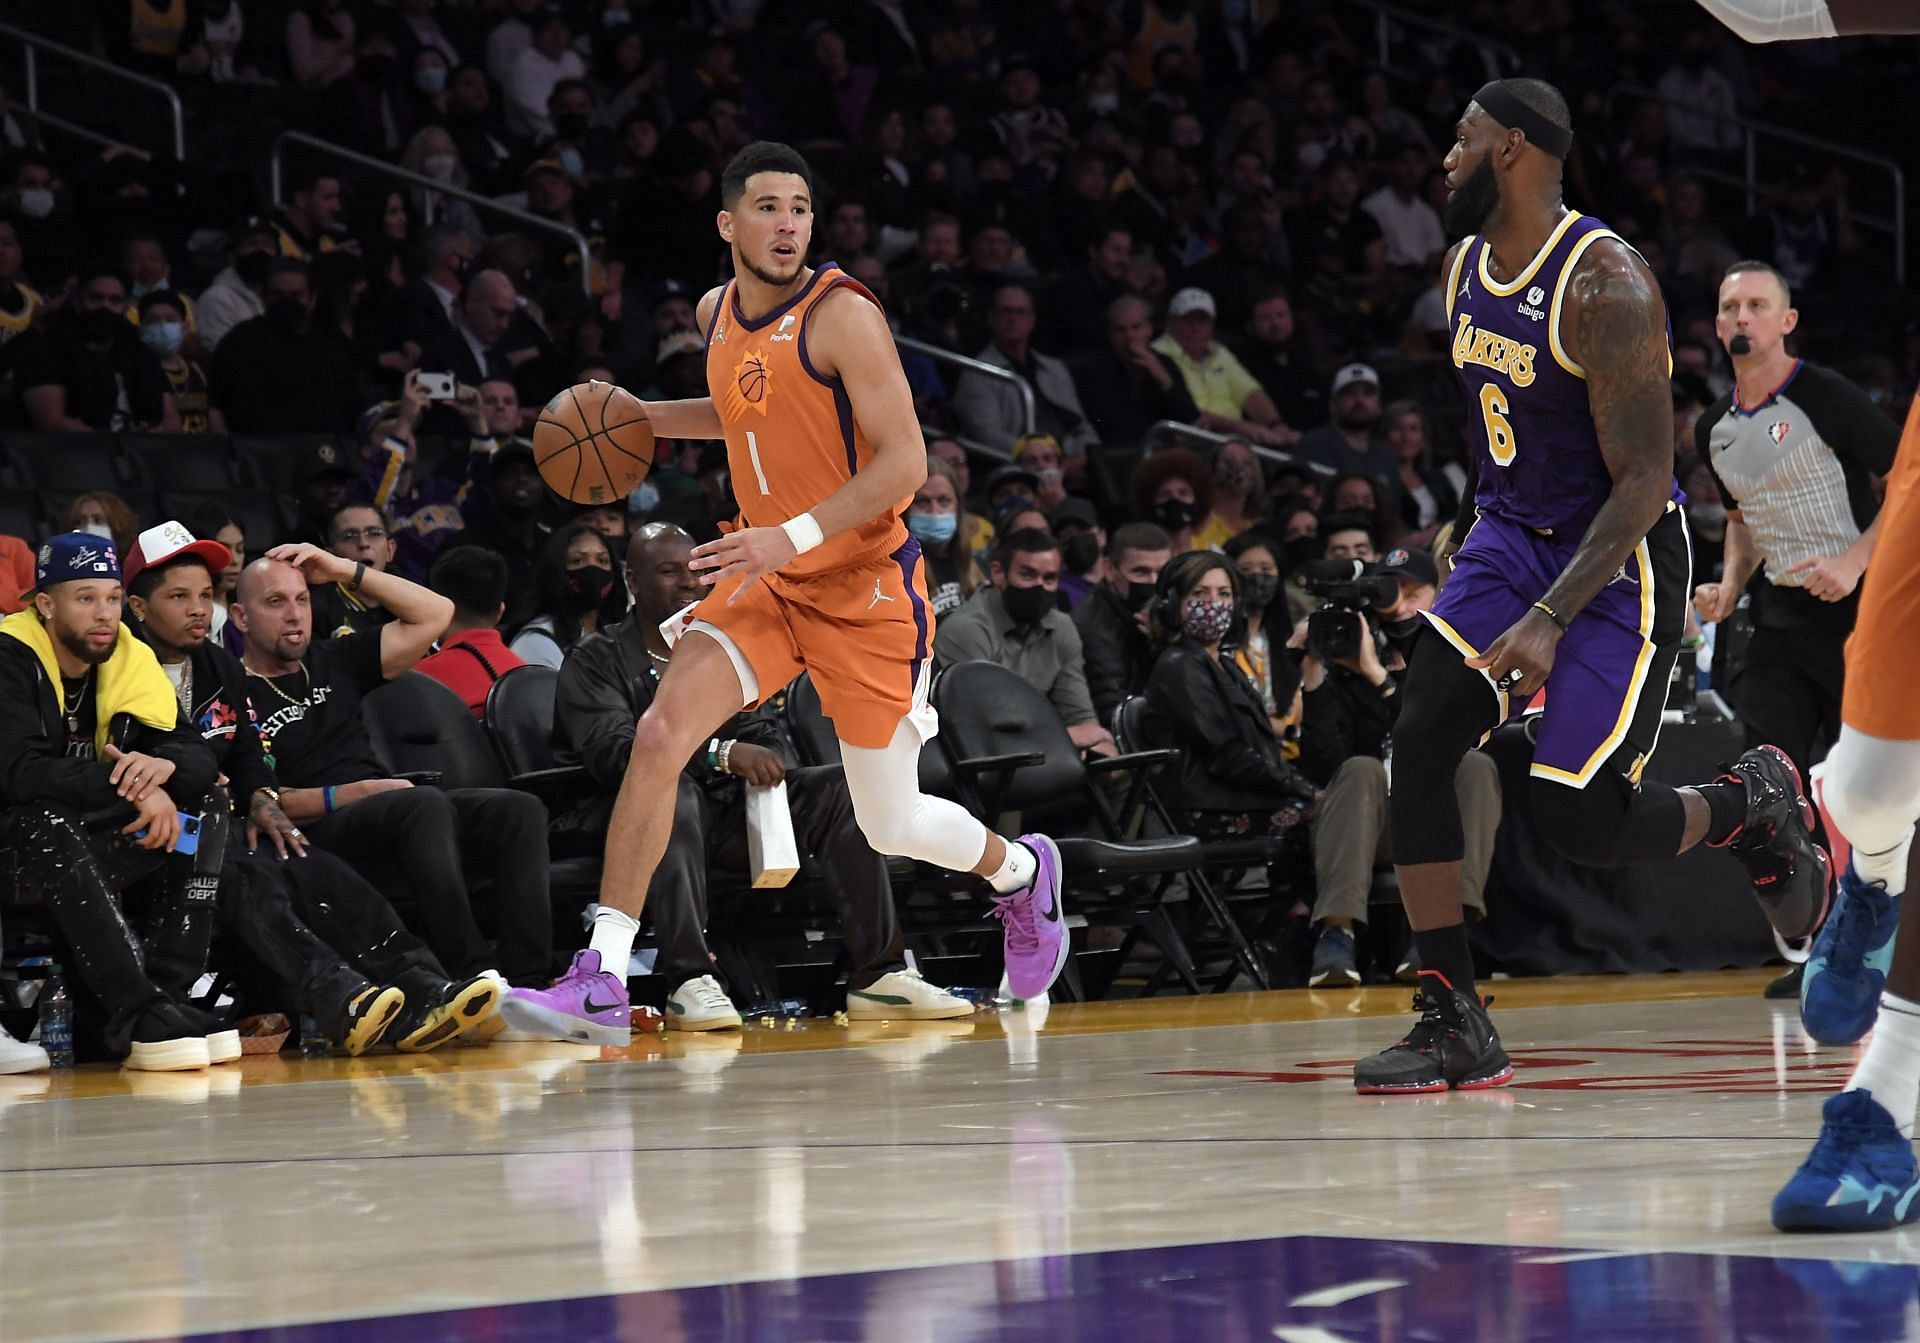 Devin Booker of the Phoenix Suns looks to pass against LeBron James of the LA Lakers.